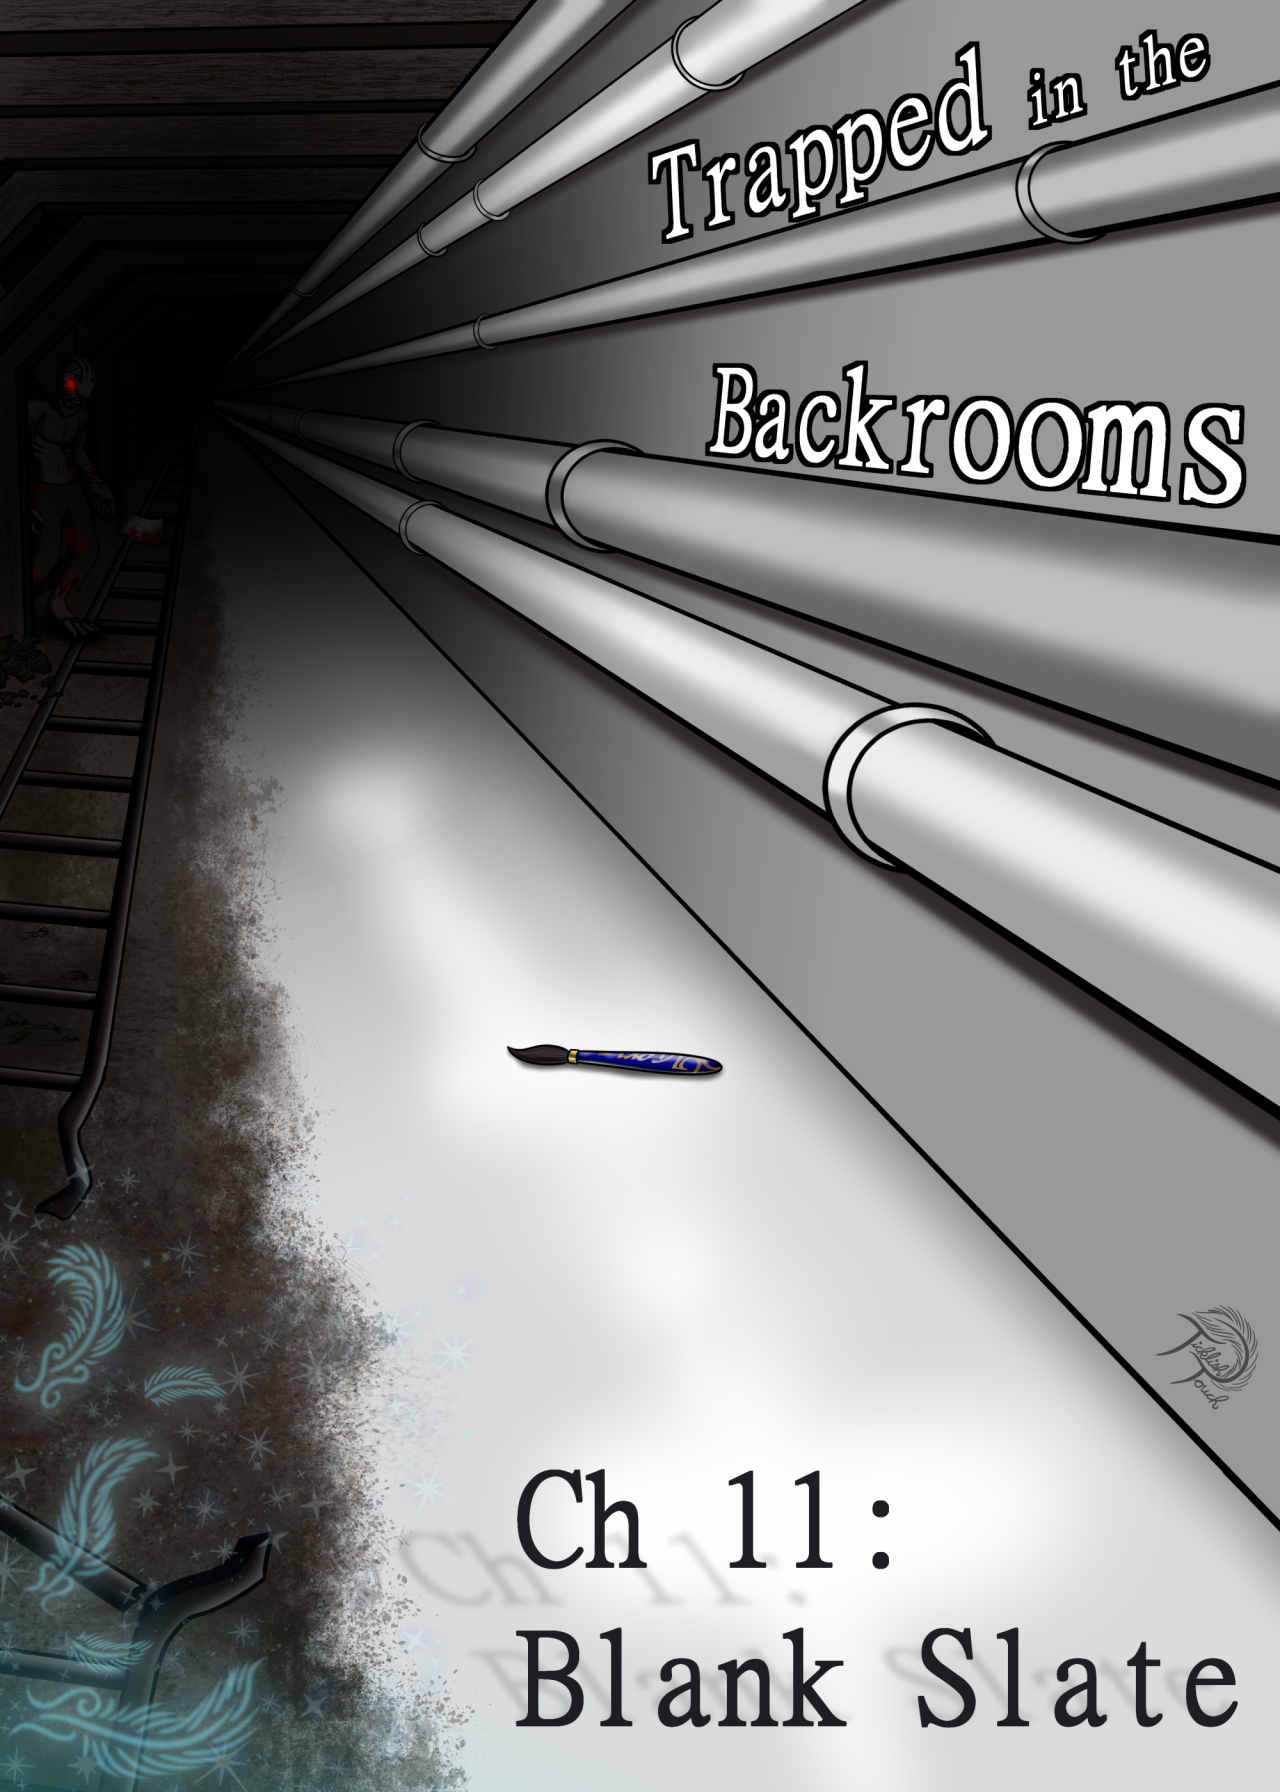 Let Us Hear Your Laughter ~ — Trapped in the Backrooms - Ch2